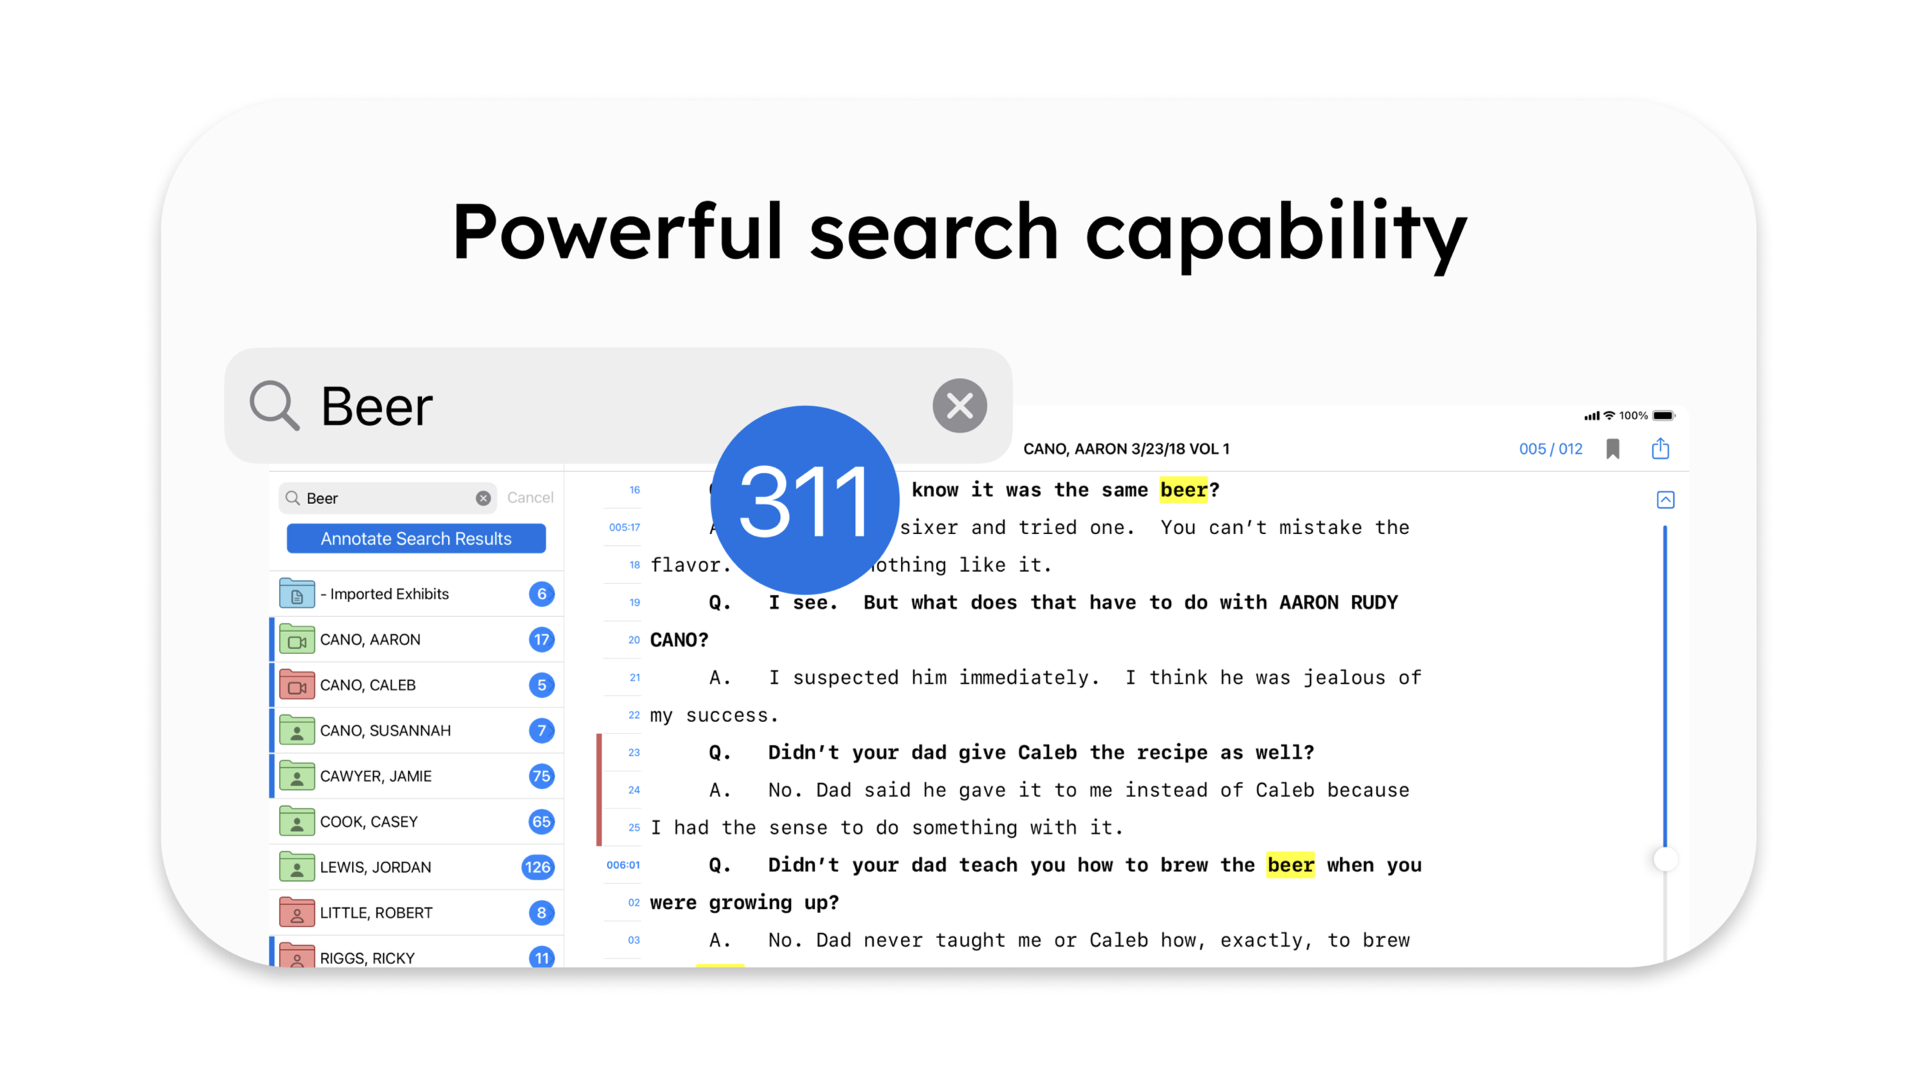 Lightning-fast search results